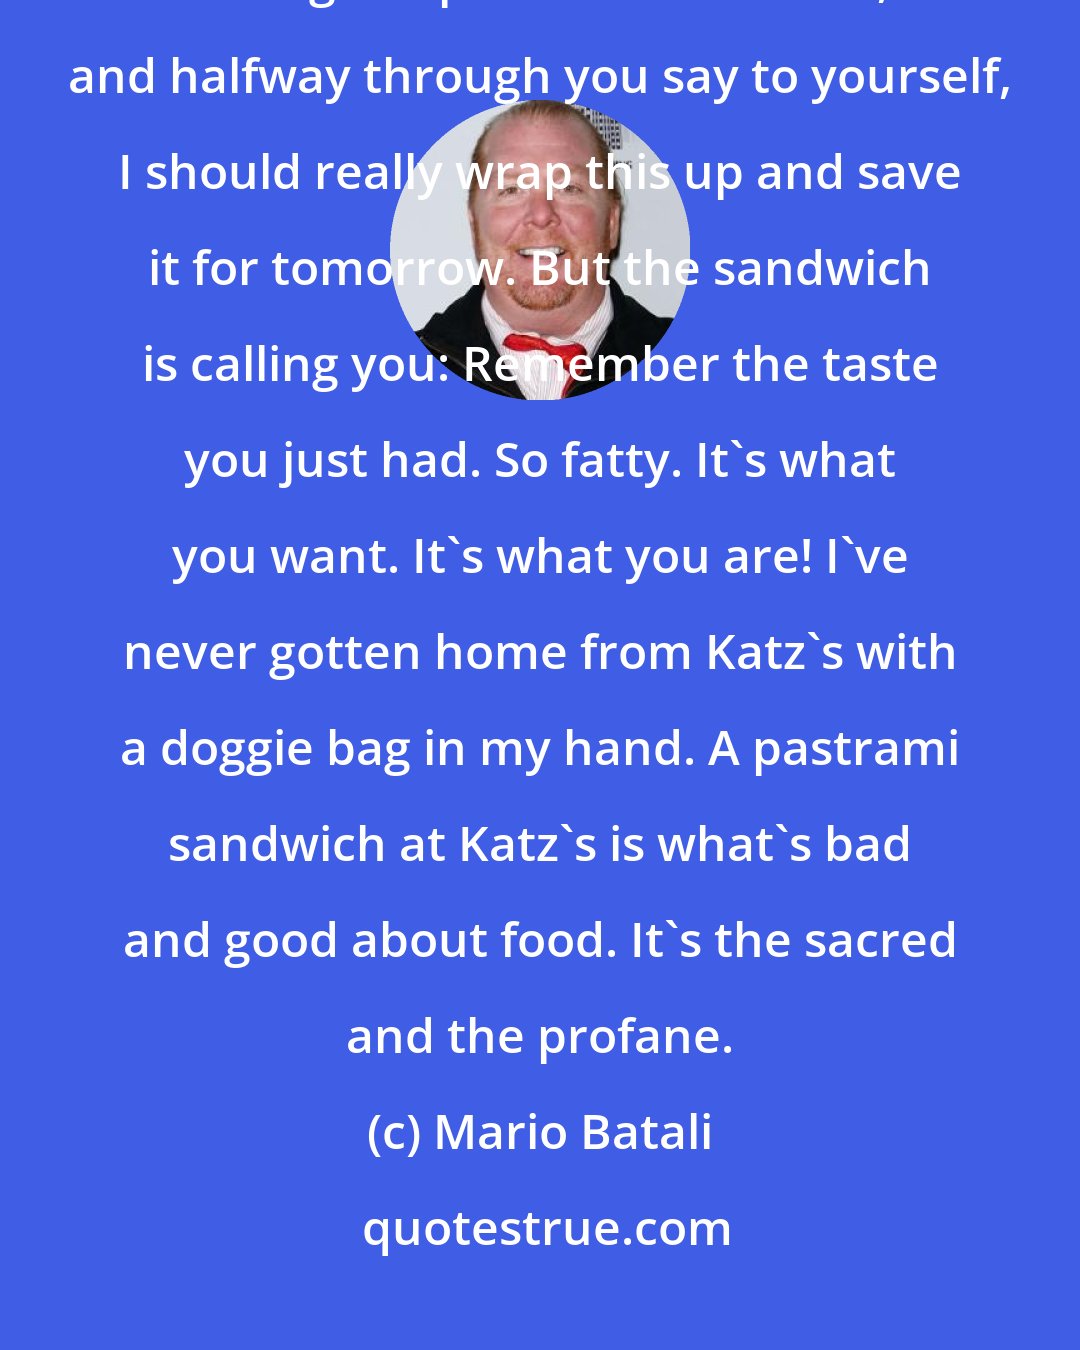 Mario Batali: You sit down at Katz's and you eat the big bowl of pickles and you're eating the pastrami sandwich, and halfway through you say to yourself, I should really wrap this up and save it for tomorrow. But the sandwich is calling you: Remember the taste you just had. So fatty. It's what you want. It's what you are! I've never gotten home from Katz's with a doggie bag in my hand. A pastrami sandwich at Katz's is what's bad and good about food. It's the sacred and the profane.